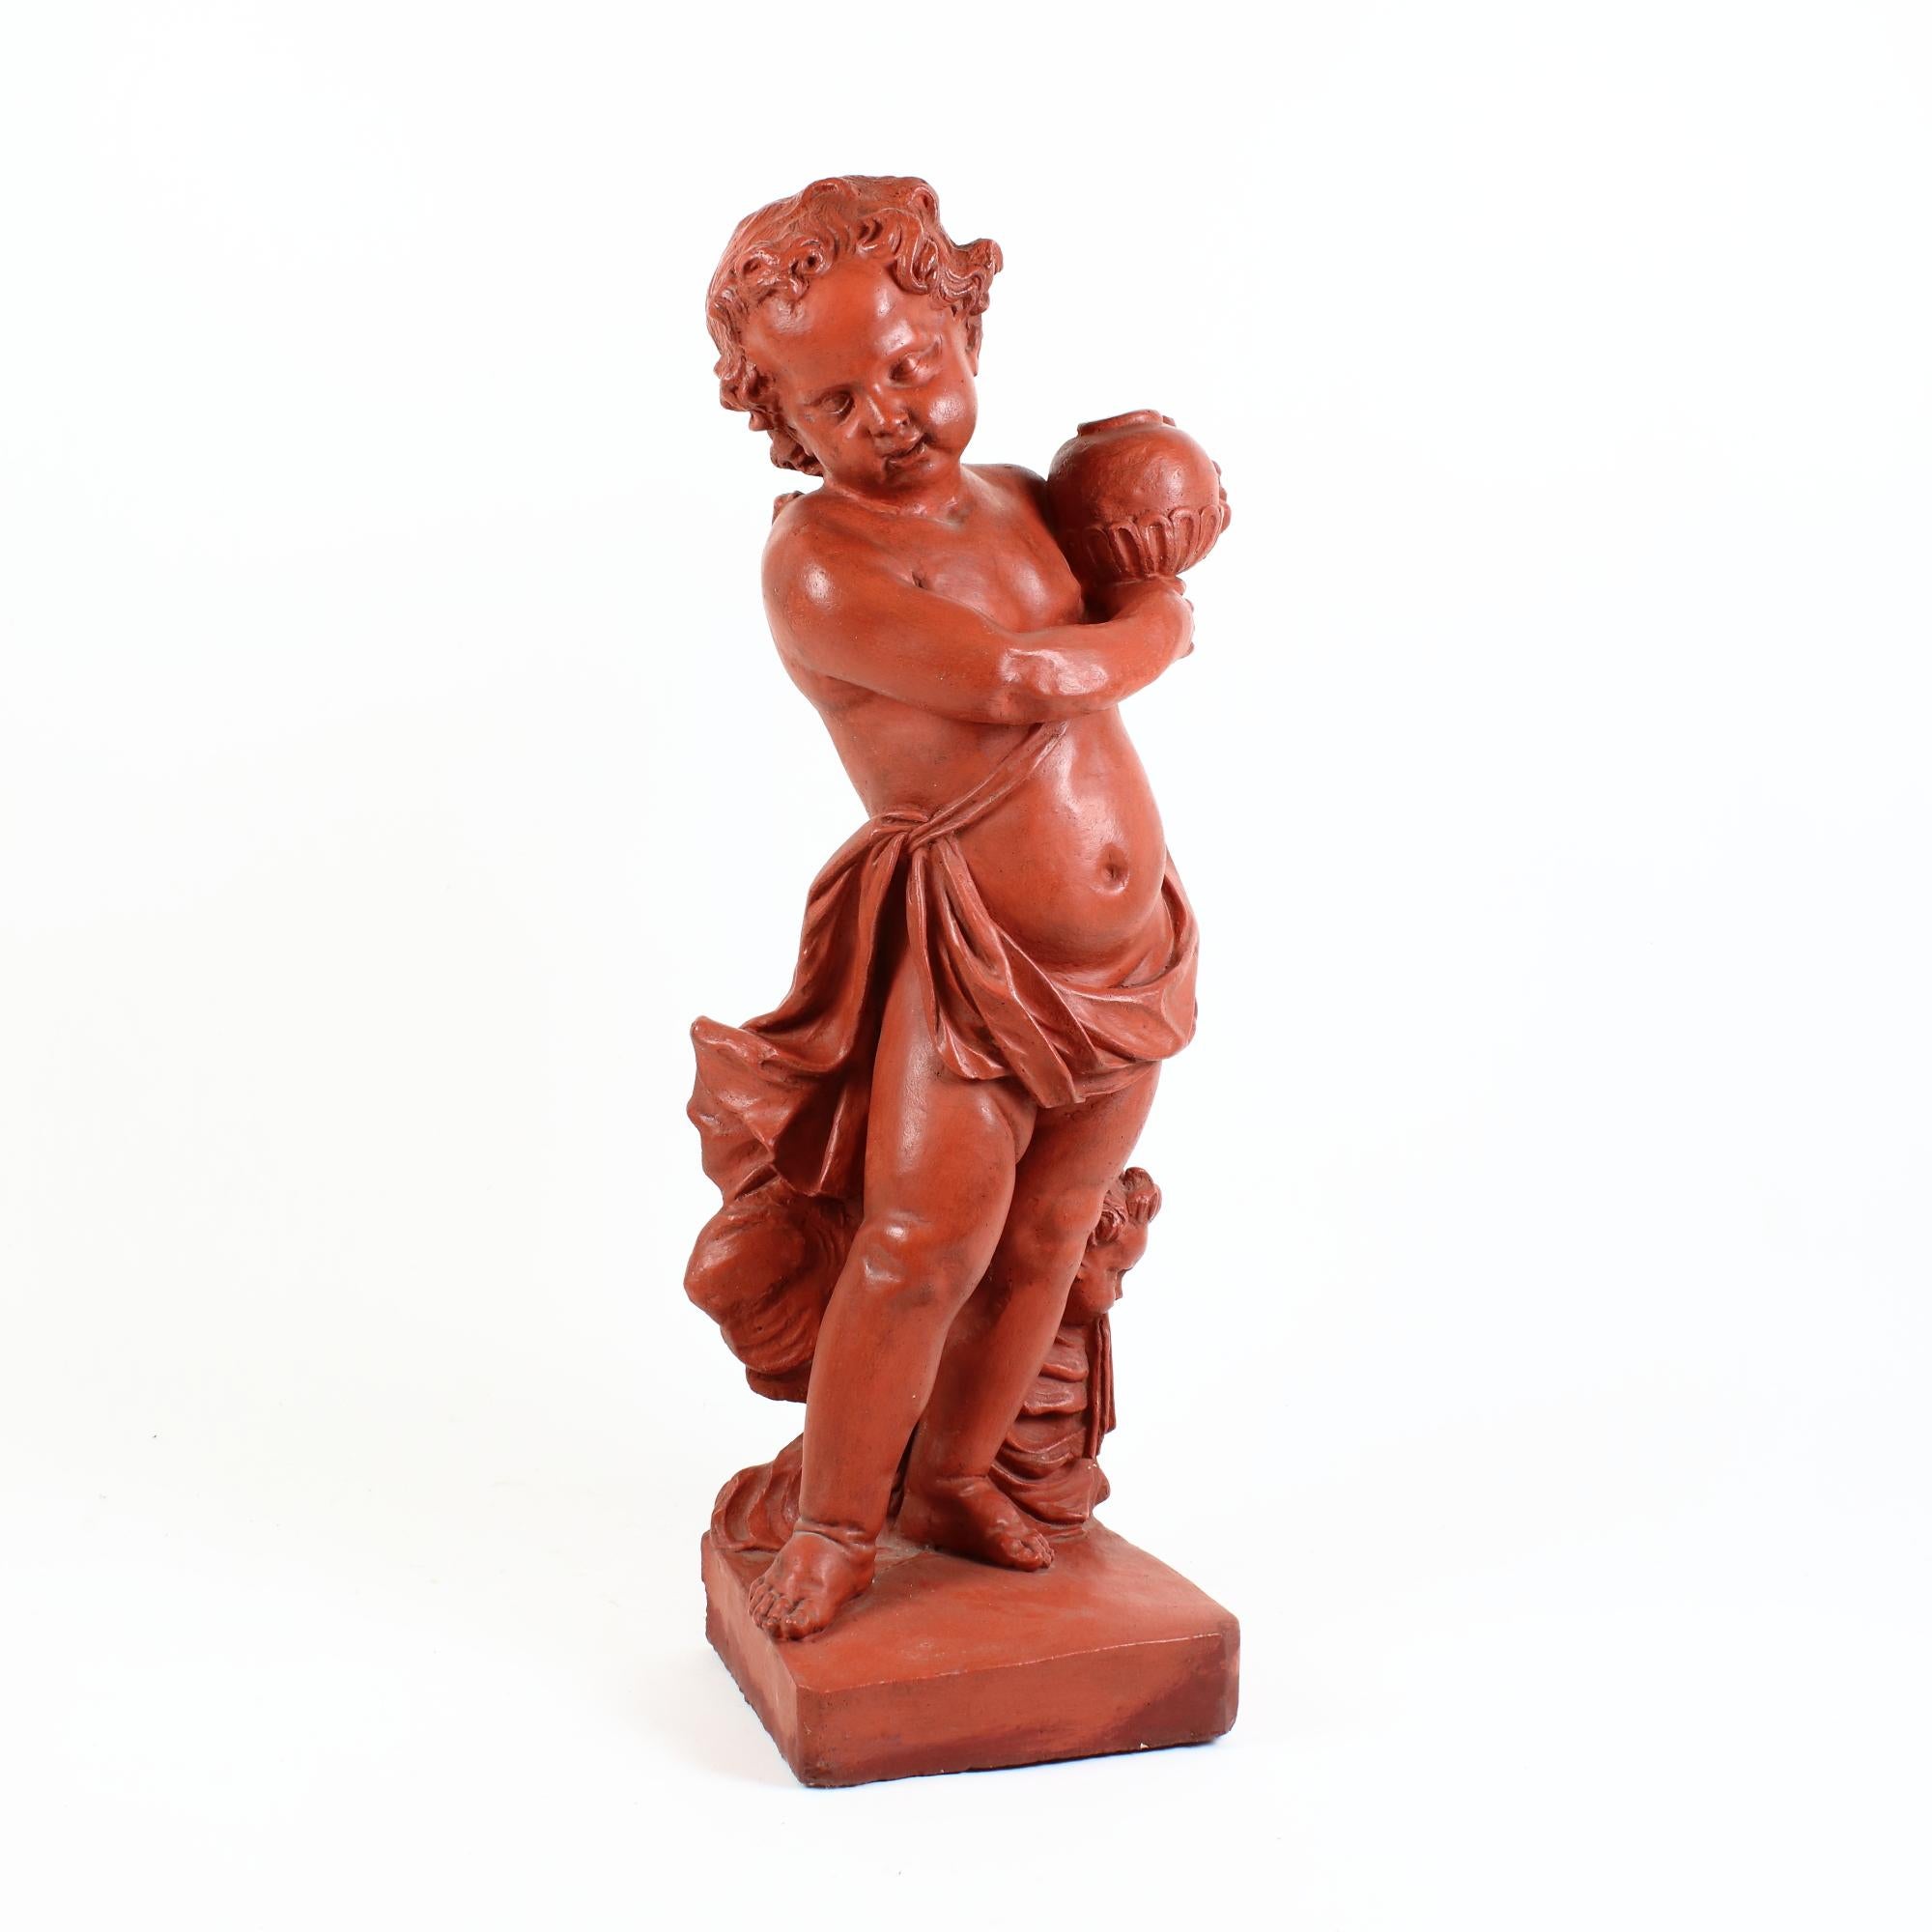 Late 19th century French large Louis XV sculpture of a Putto with Zephyr.

A figure of a boy standing on a rectangular plinth, looking aside while holding a ball or stylised poppy capsule and a stick in his hands. His only dress is a drapery